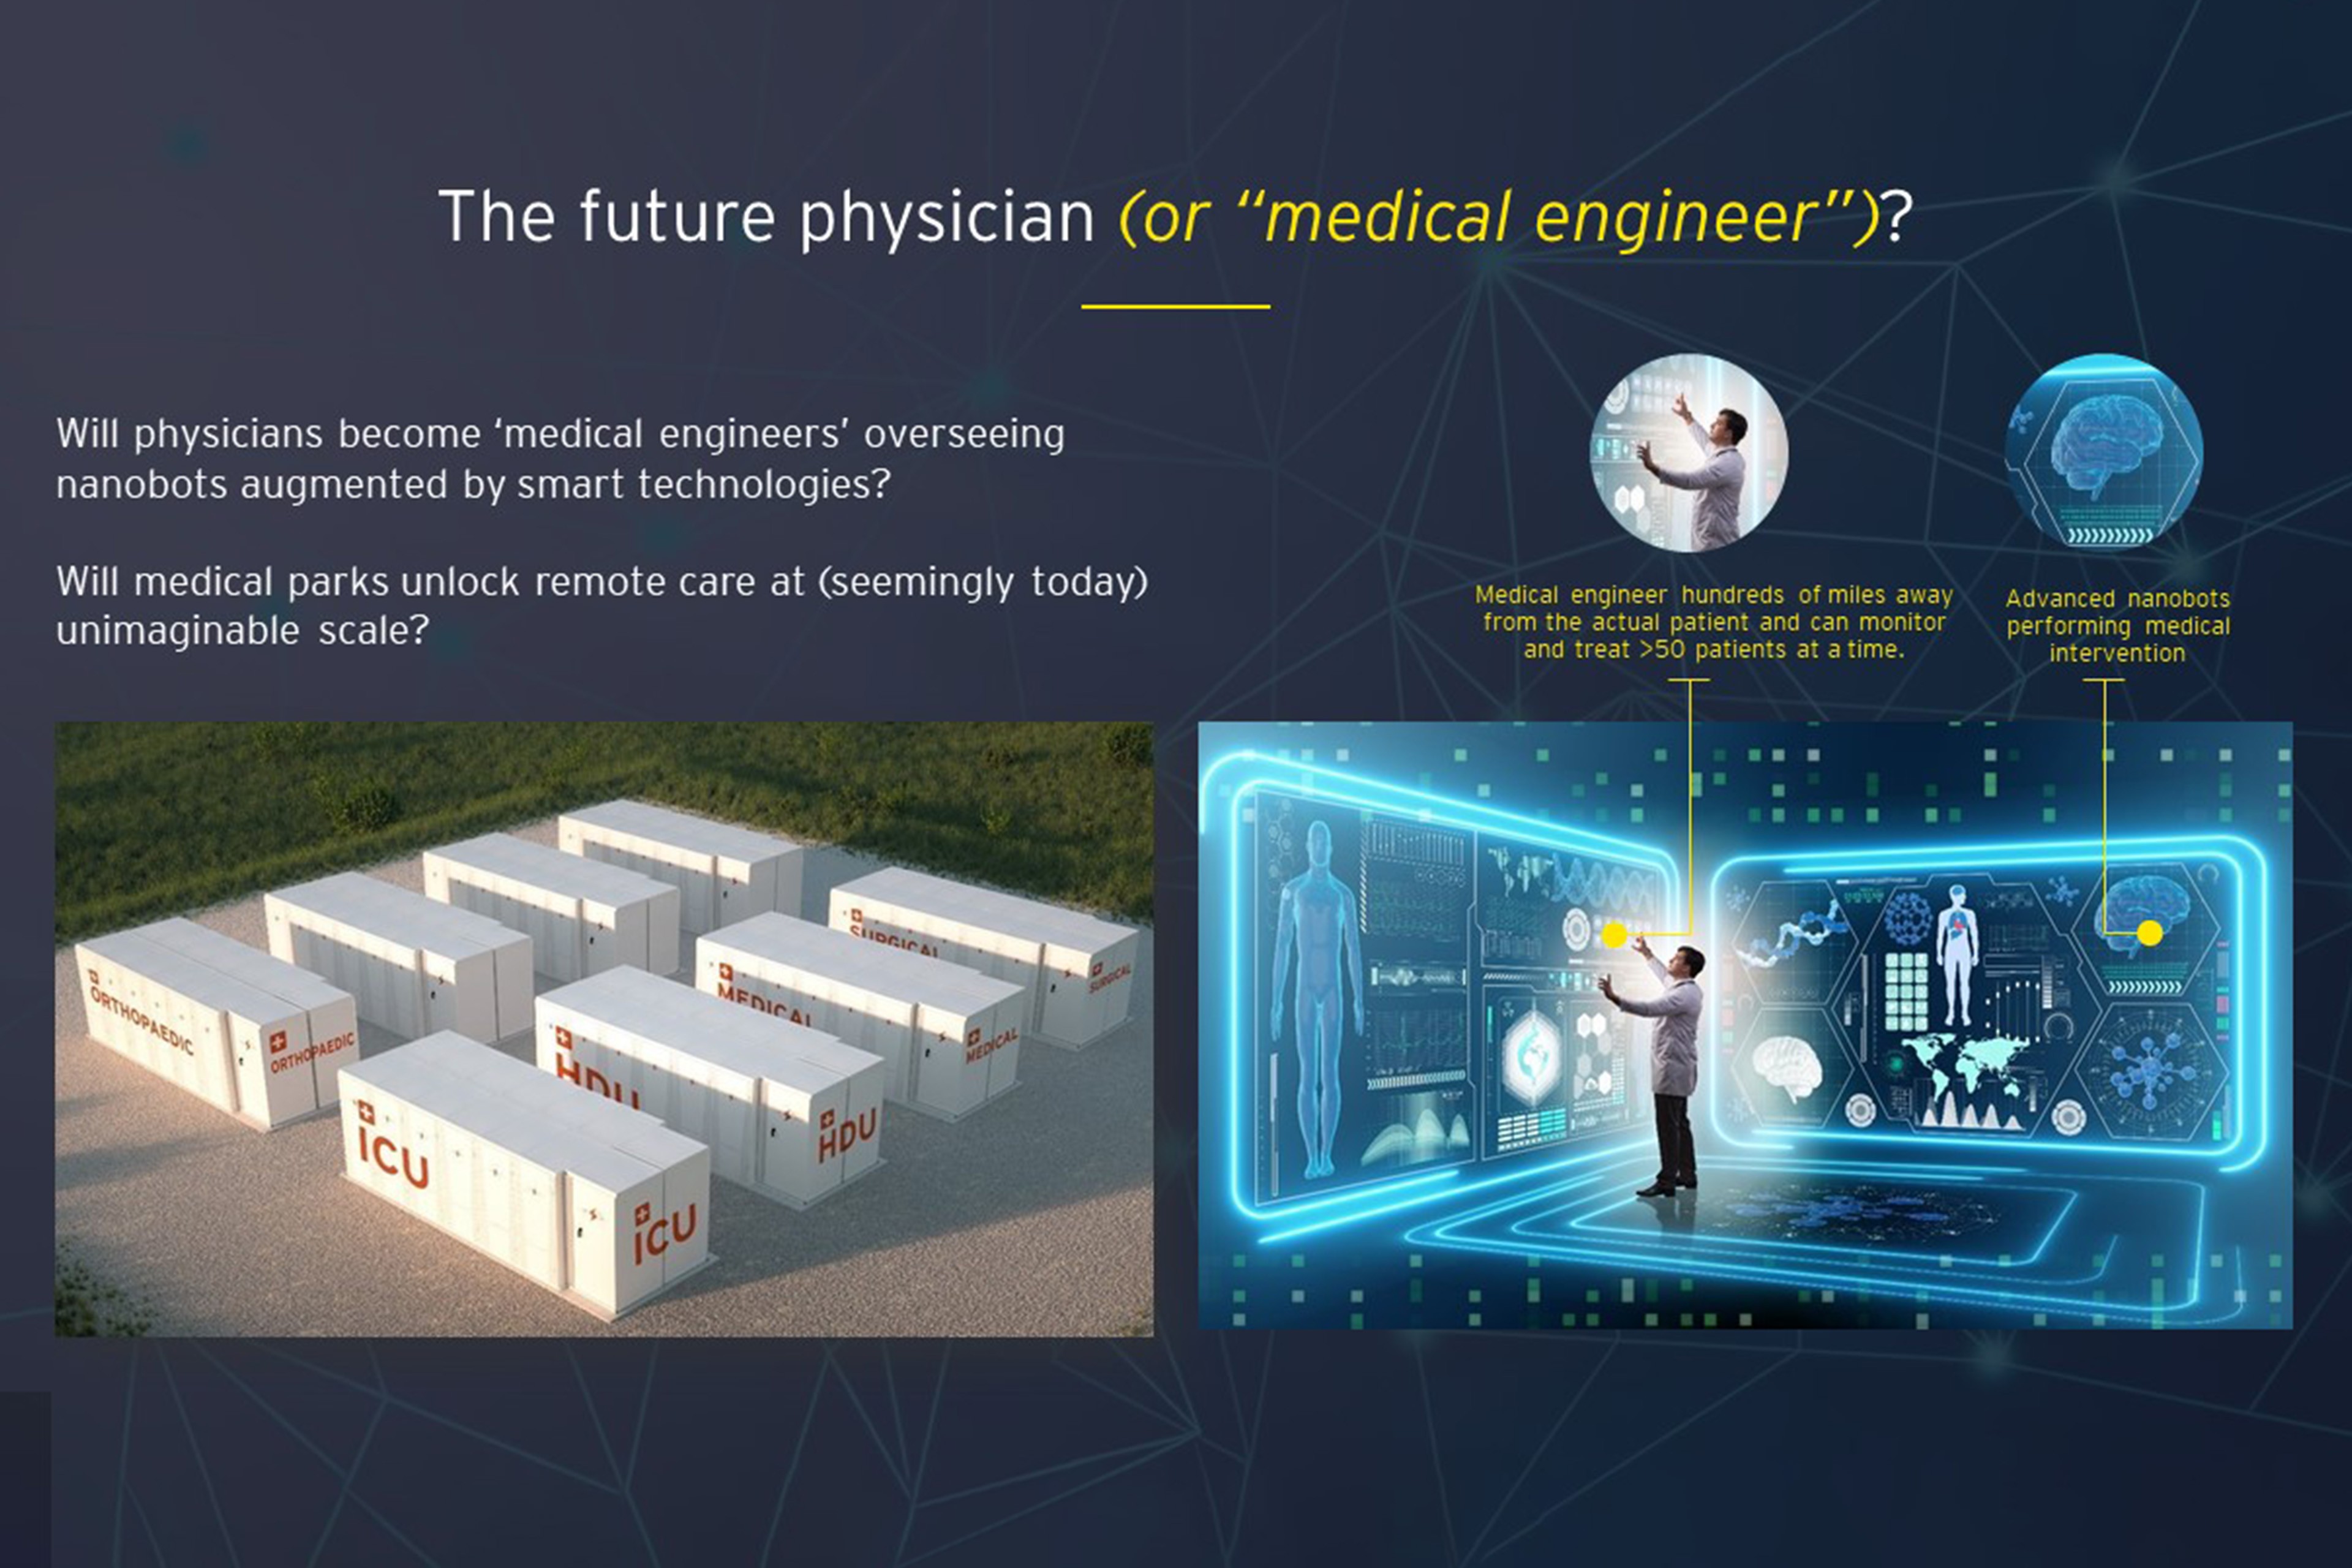 The future Physician charts 1